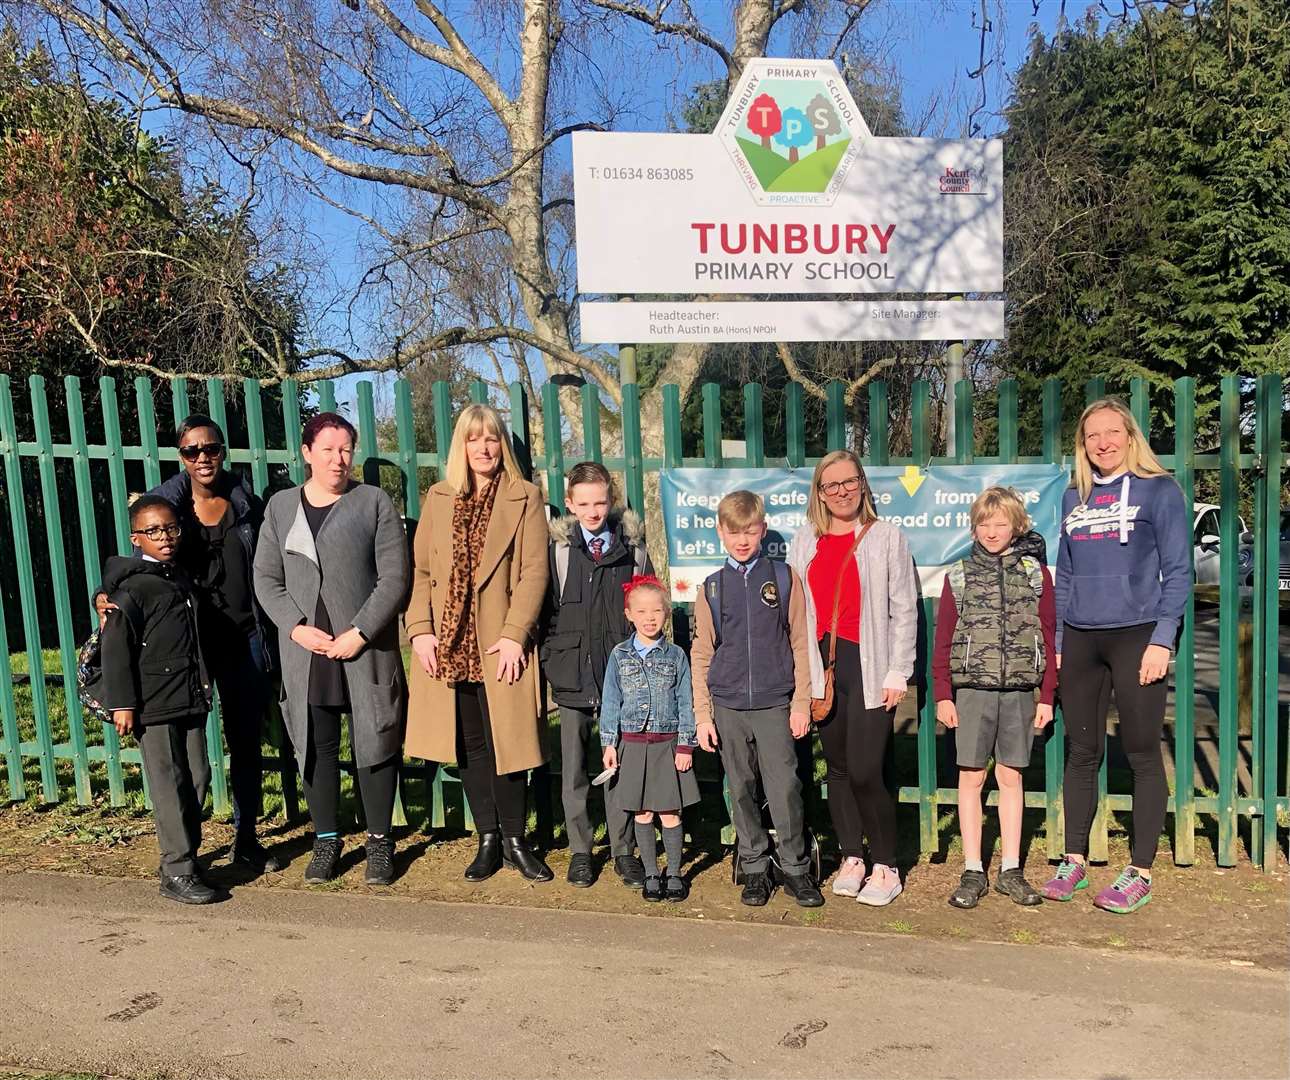 Parents and children outside Tunbury Primary School in Walderslade where there is a campaign for better road safety measures